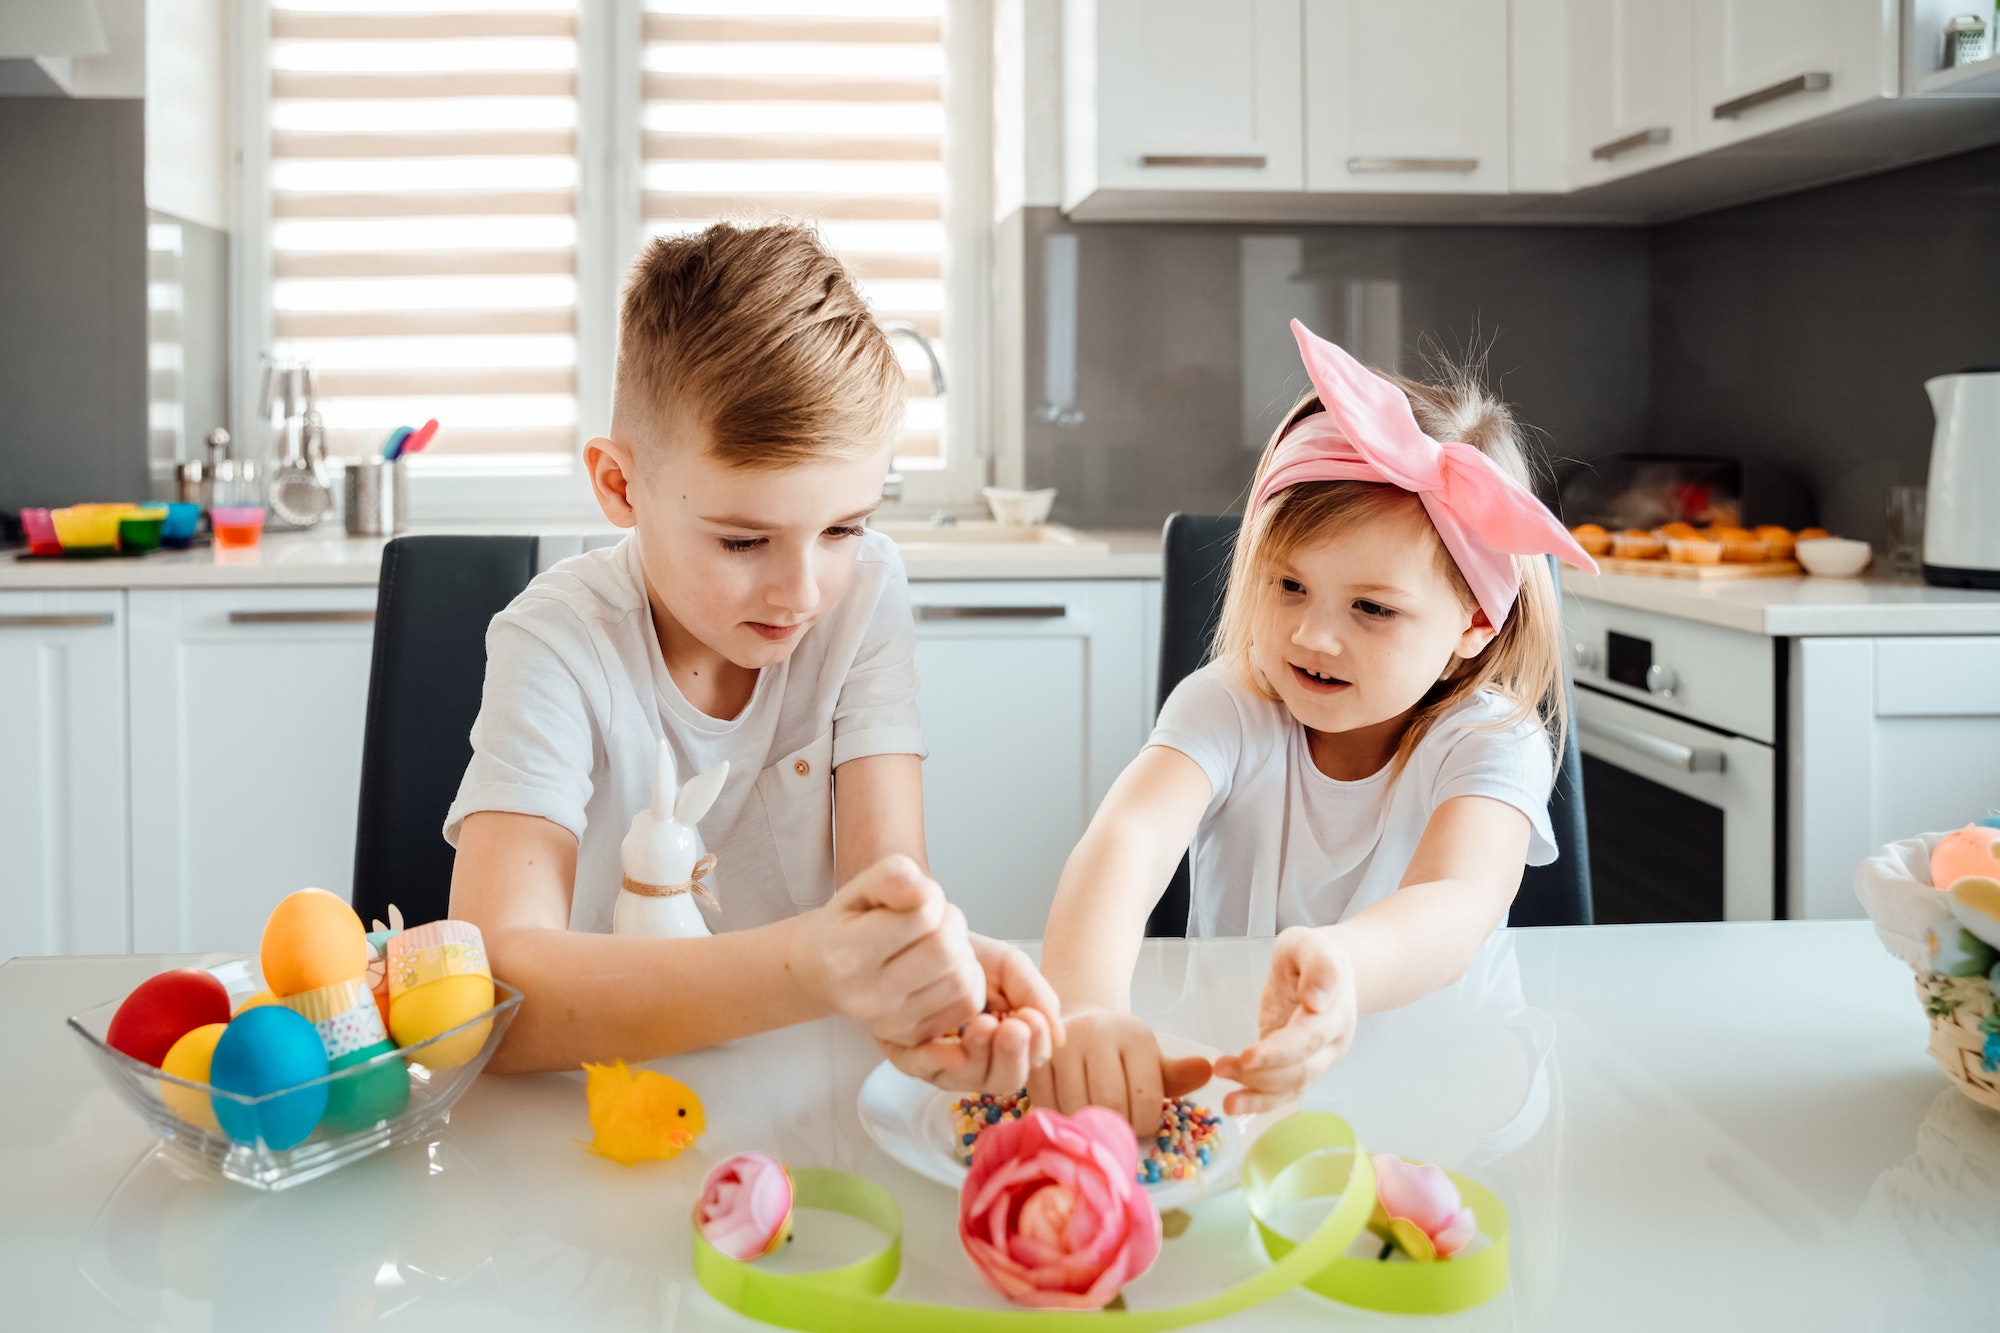 Children get ready to make Easter decorations